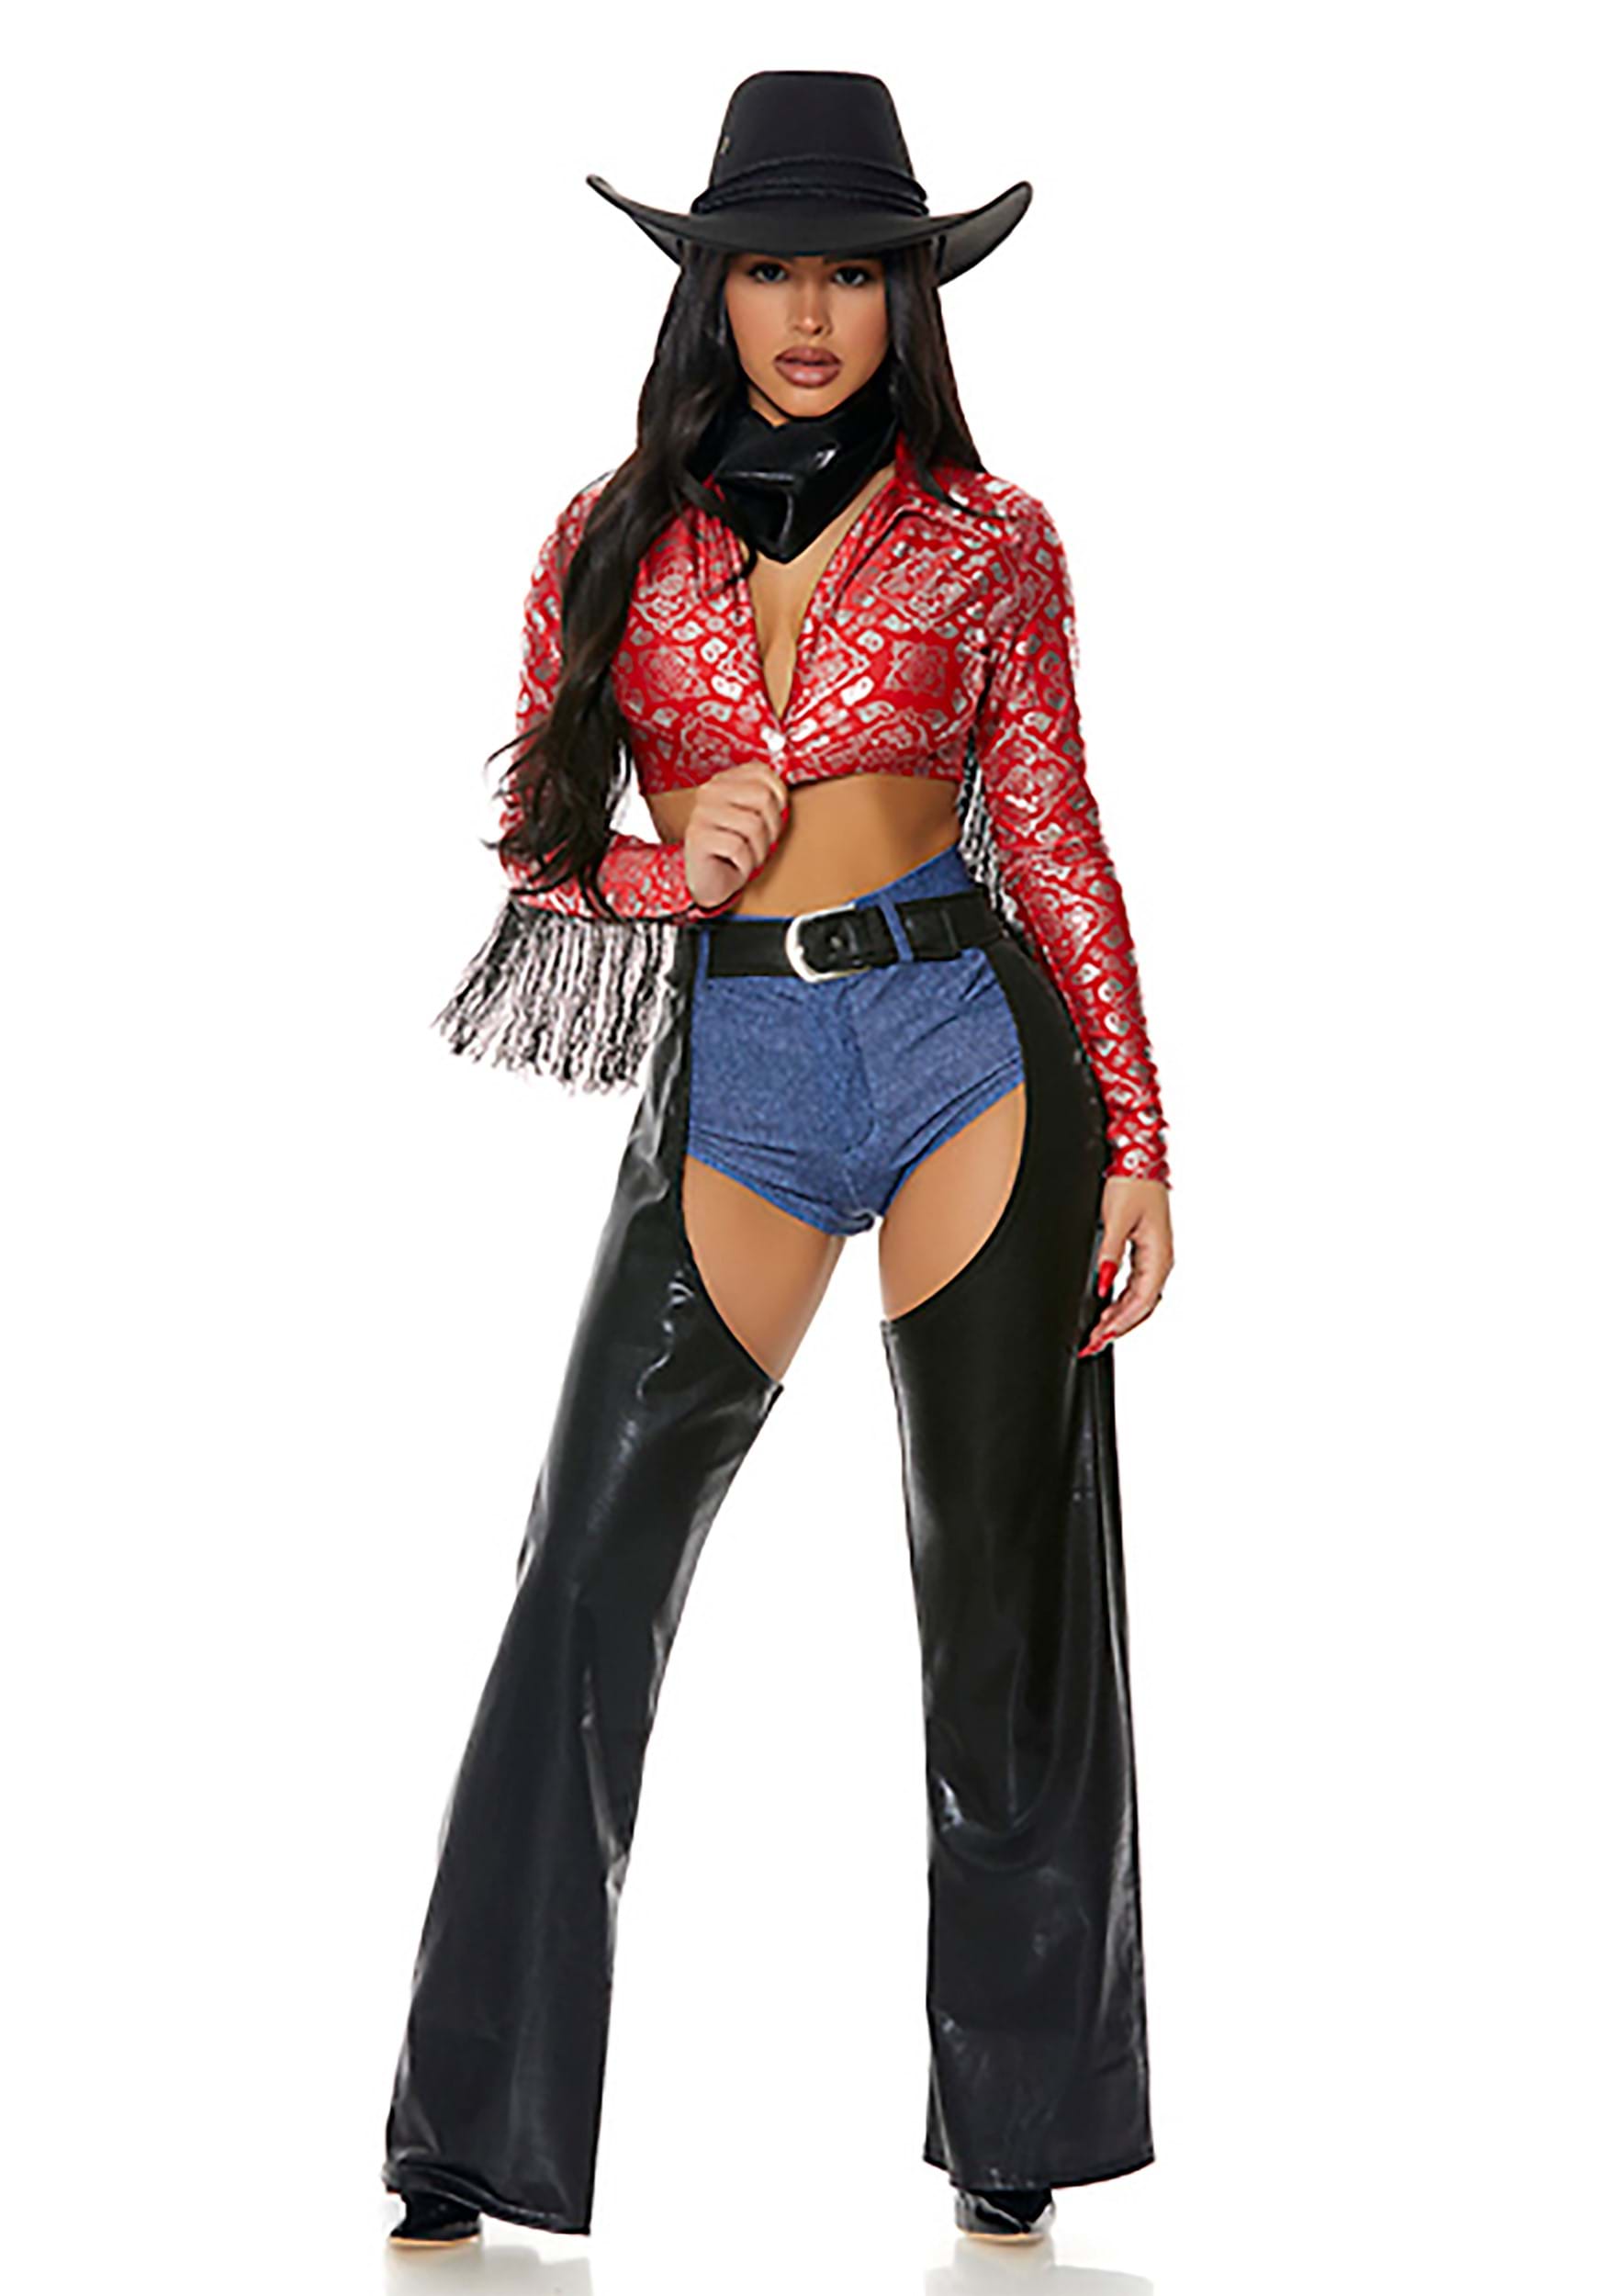 Women's Sexy Saddle Up Cowgirl Fancy Dress Costume